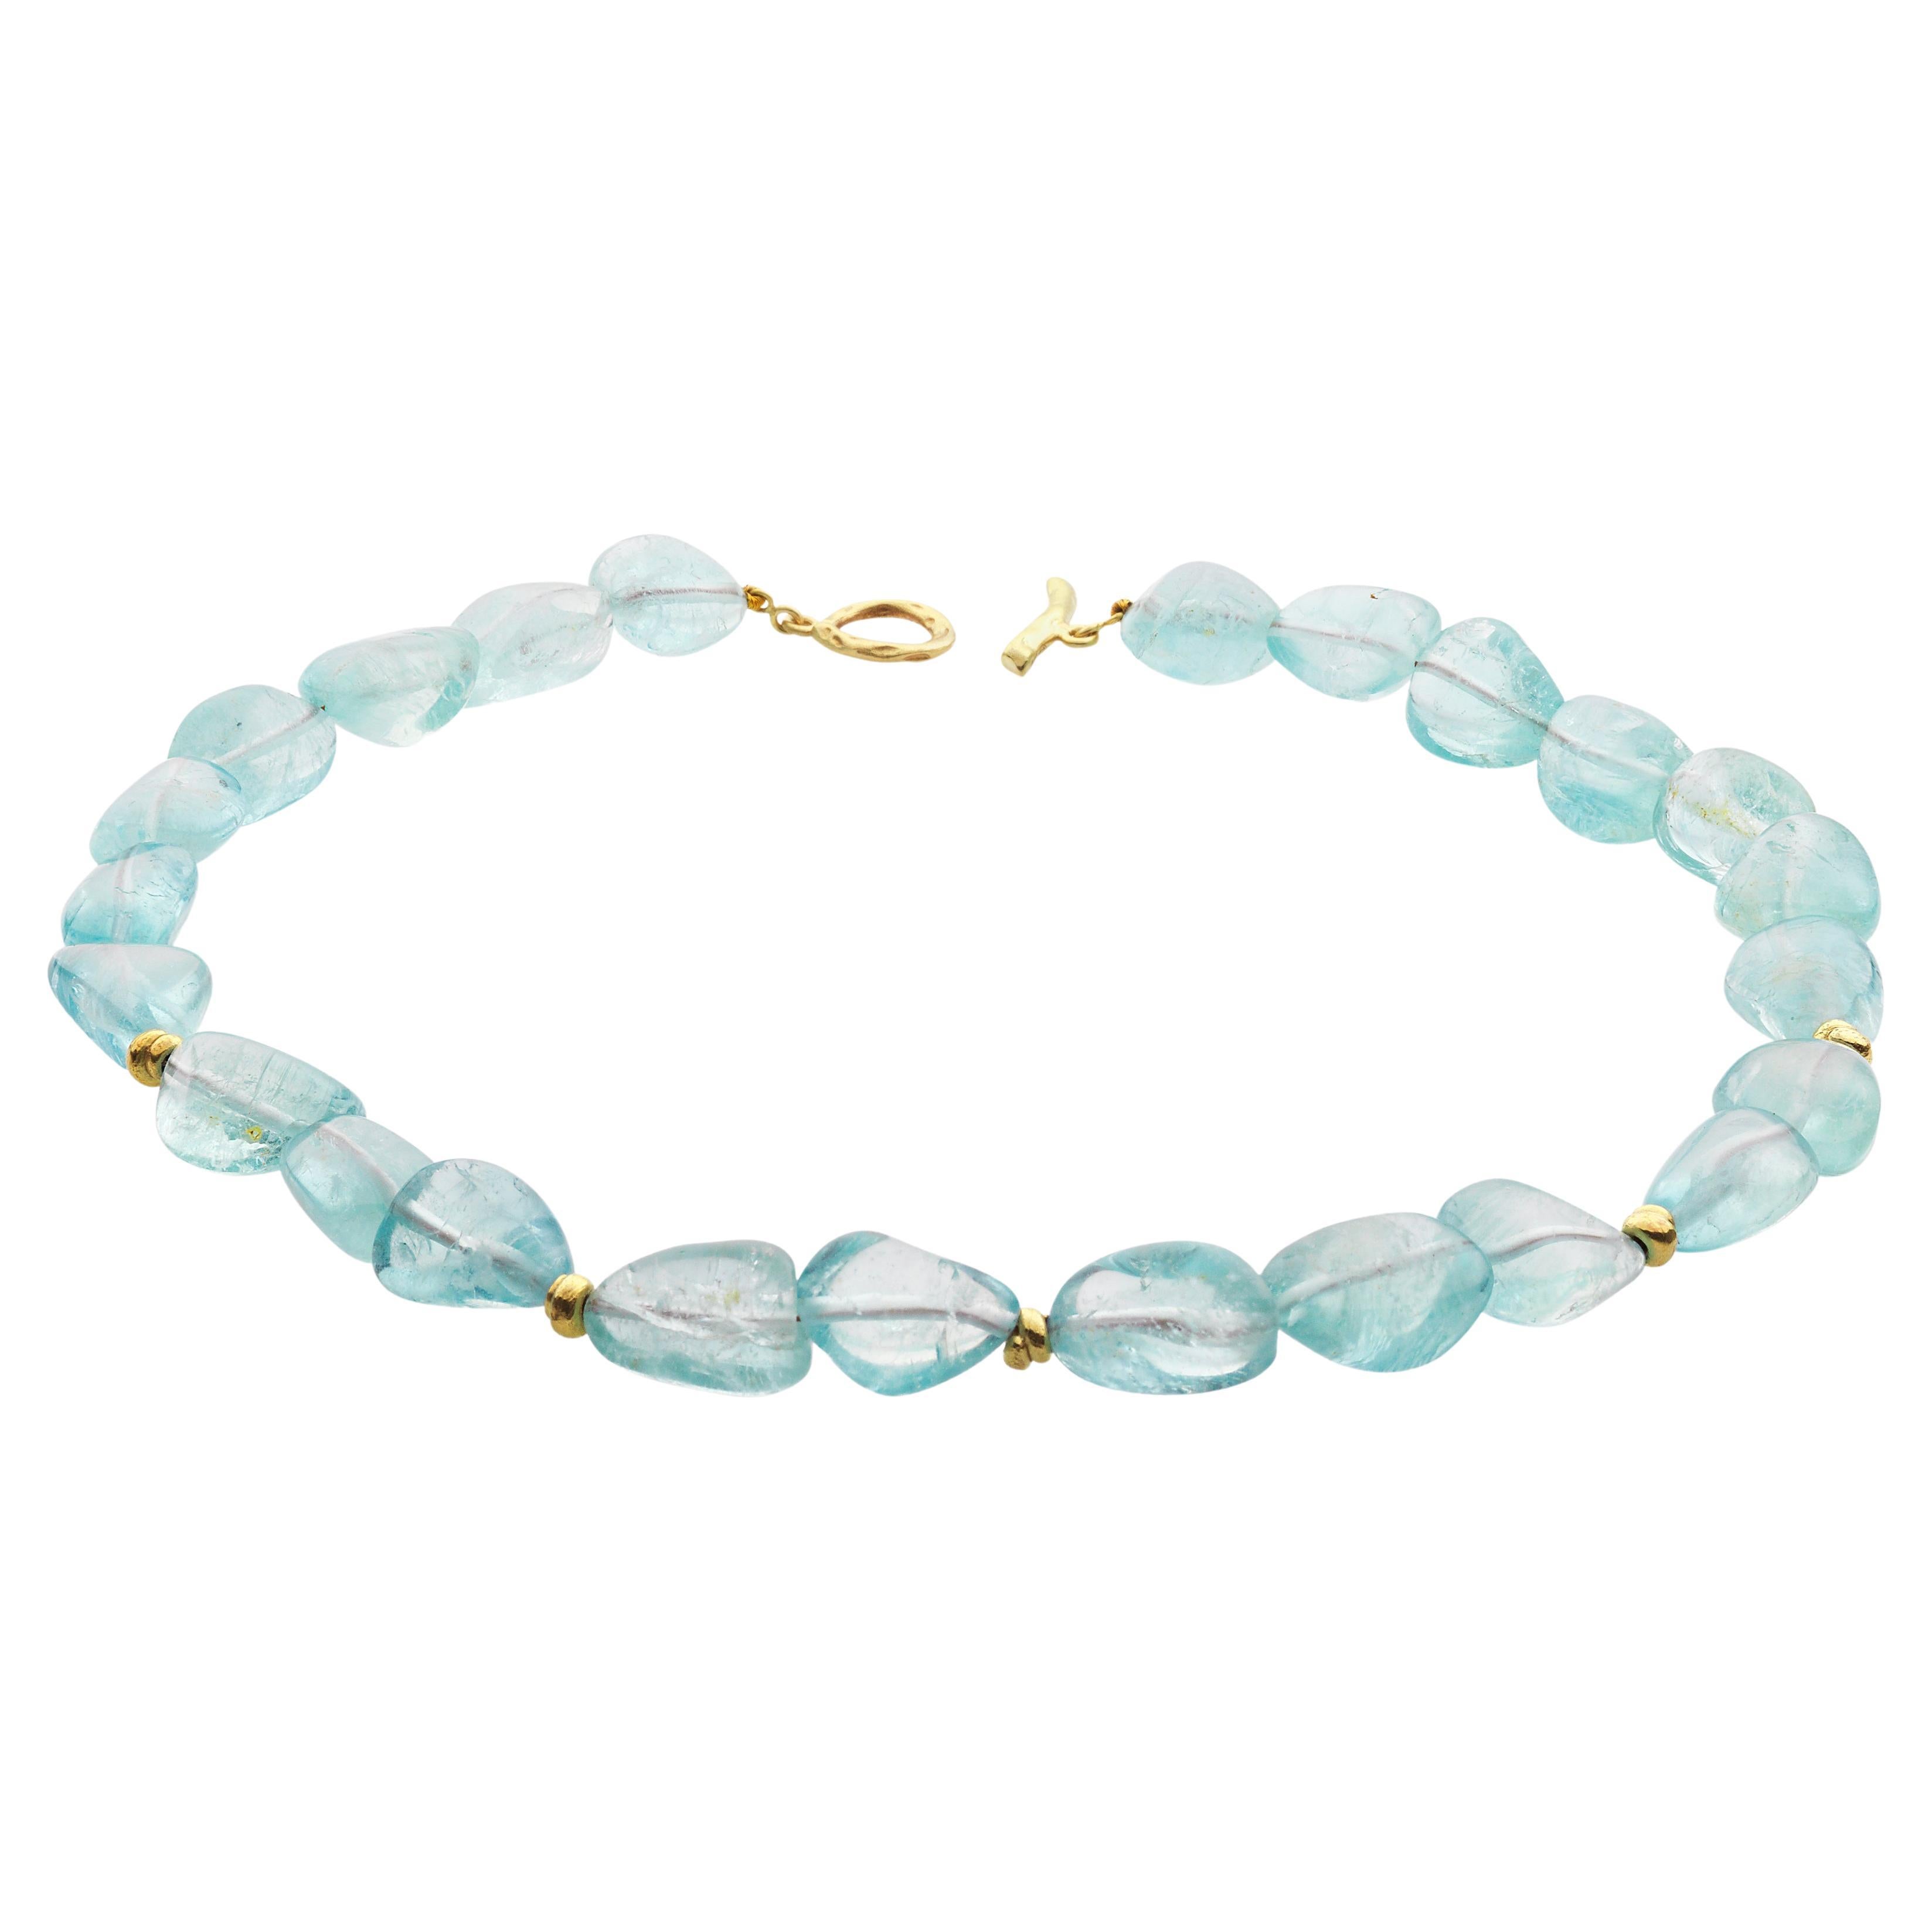 Short Aquamarine Beaded Necklace with 18k Gold Beads and Toggle Clasp For Sale